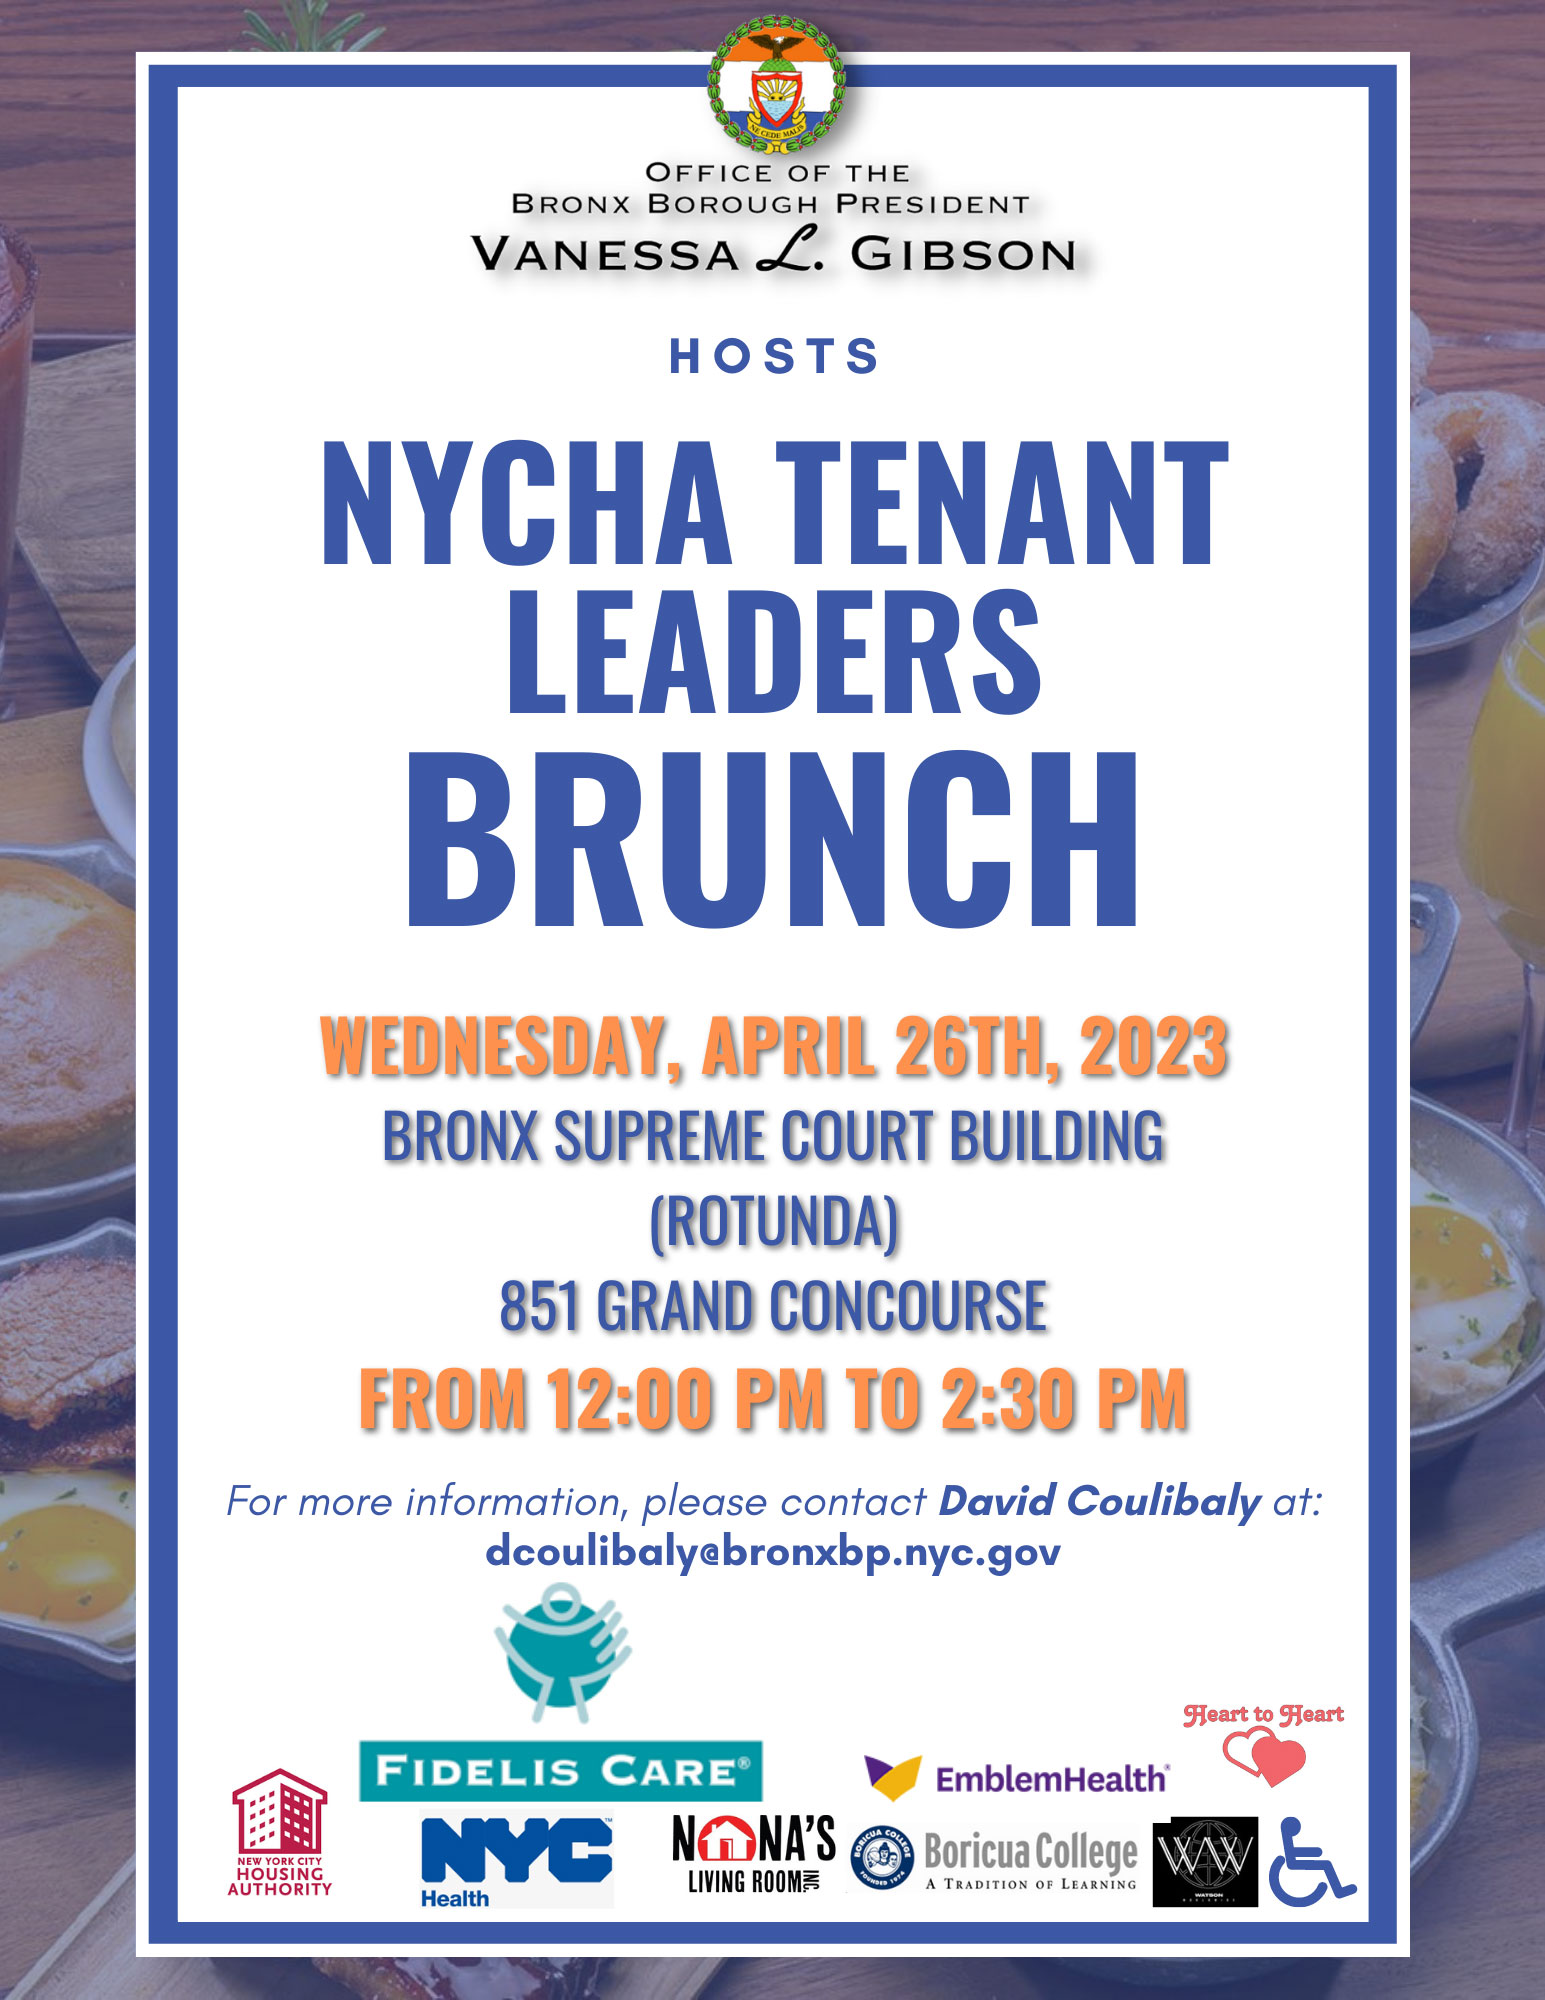 Flyer for a NYCHA Tenant Leaders Brunch